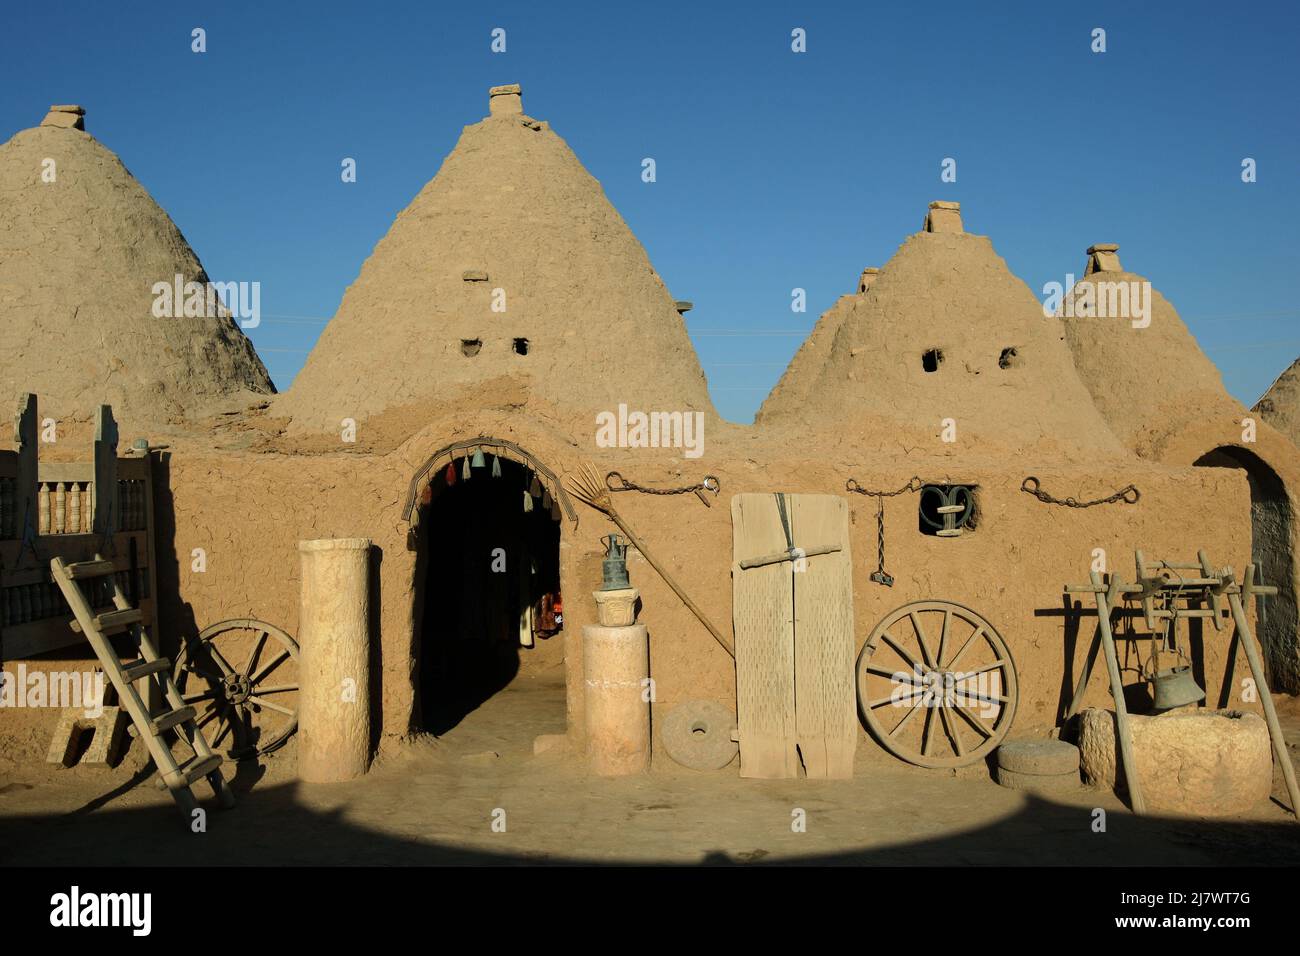 The entrance doorway into an ancient beehive home at Harran in Turkey. The homes are made of mud and clay bricks and are designed to reduce heat. Stock Photo